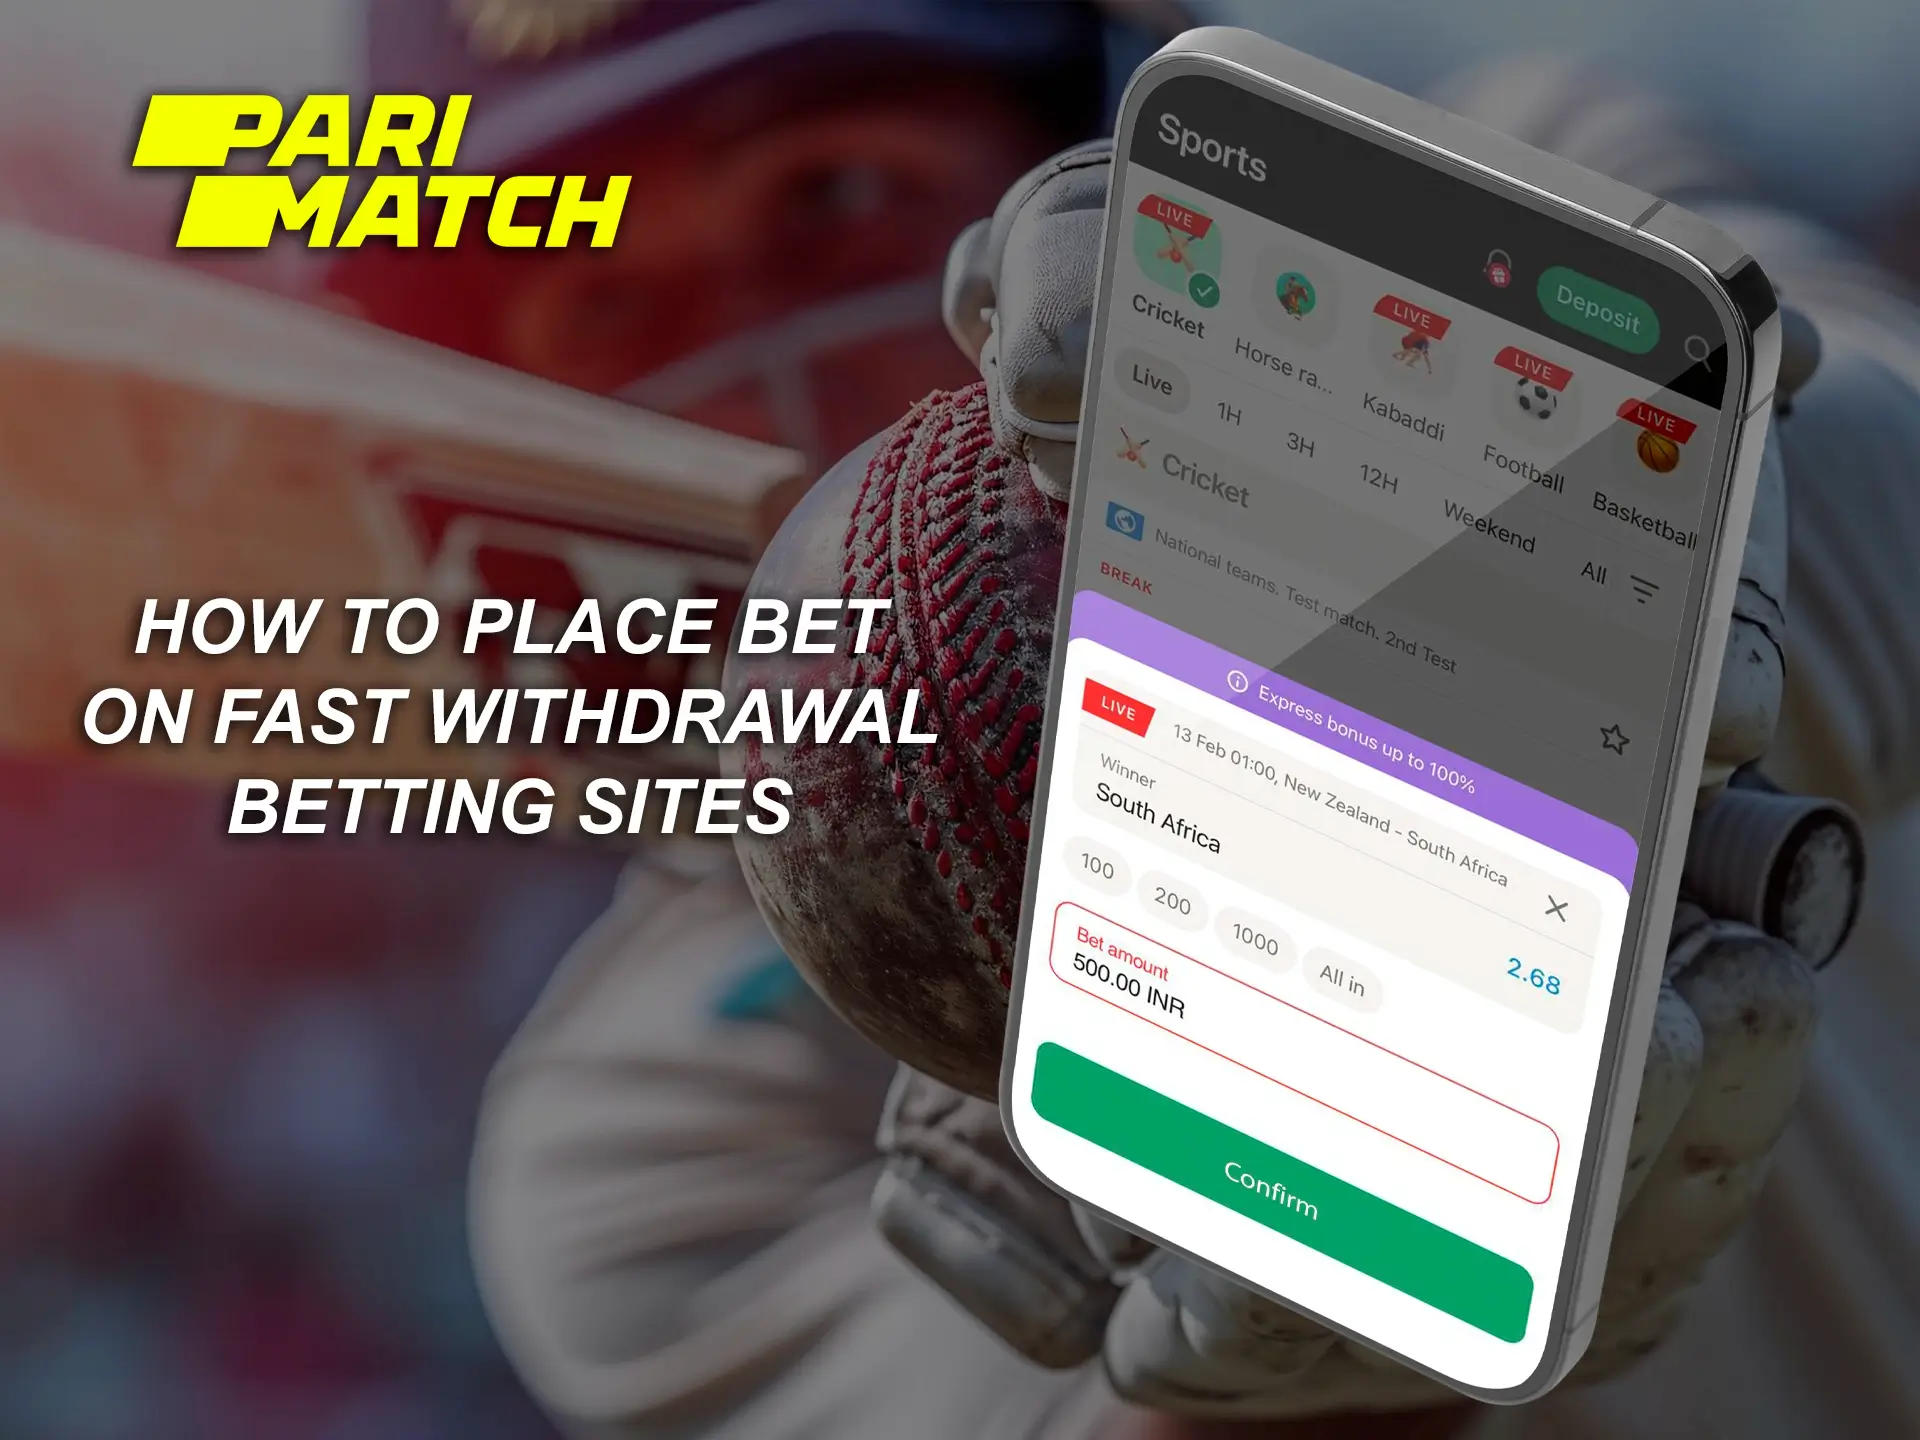 Place your bets with Parimatch, the best casino that has fast payouts to its customers.